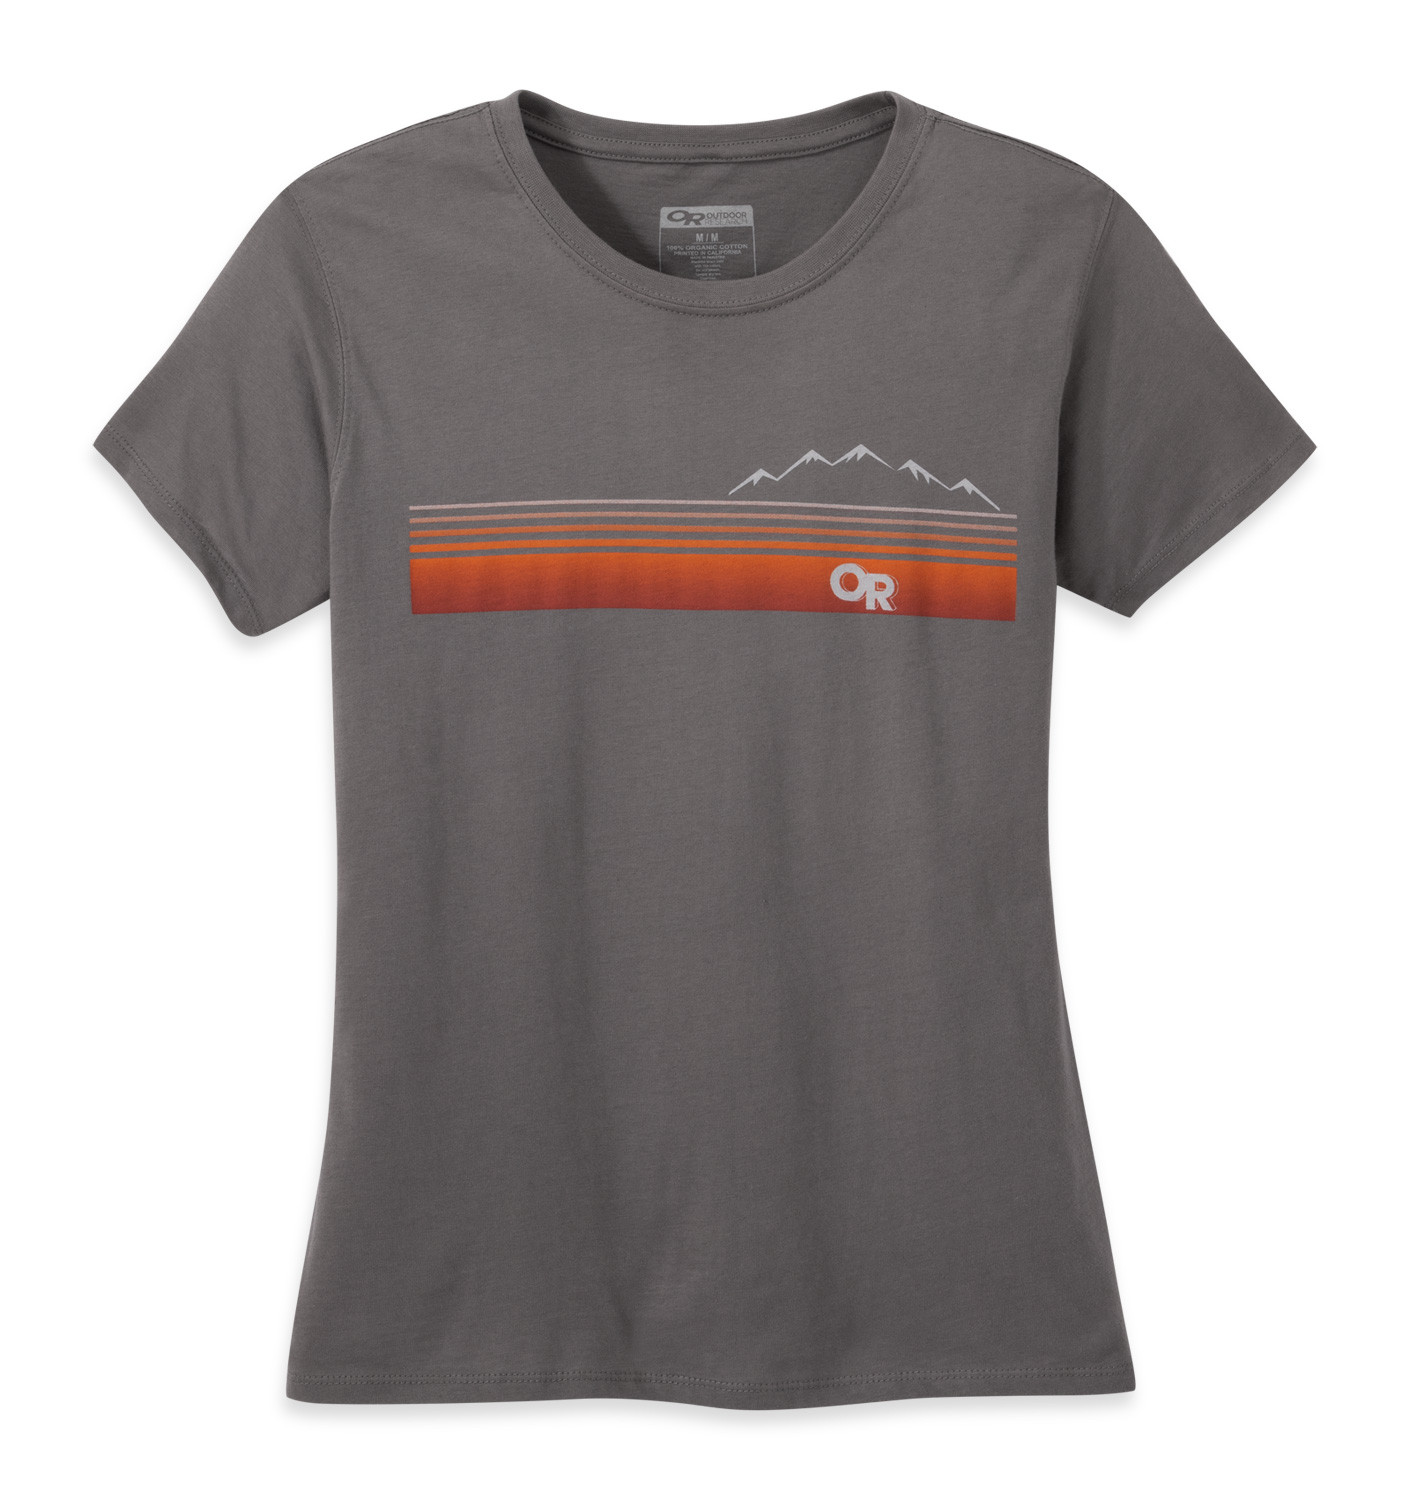 Outdoor Research Women's Ally S/S Tee, charcoal - L